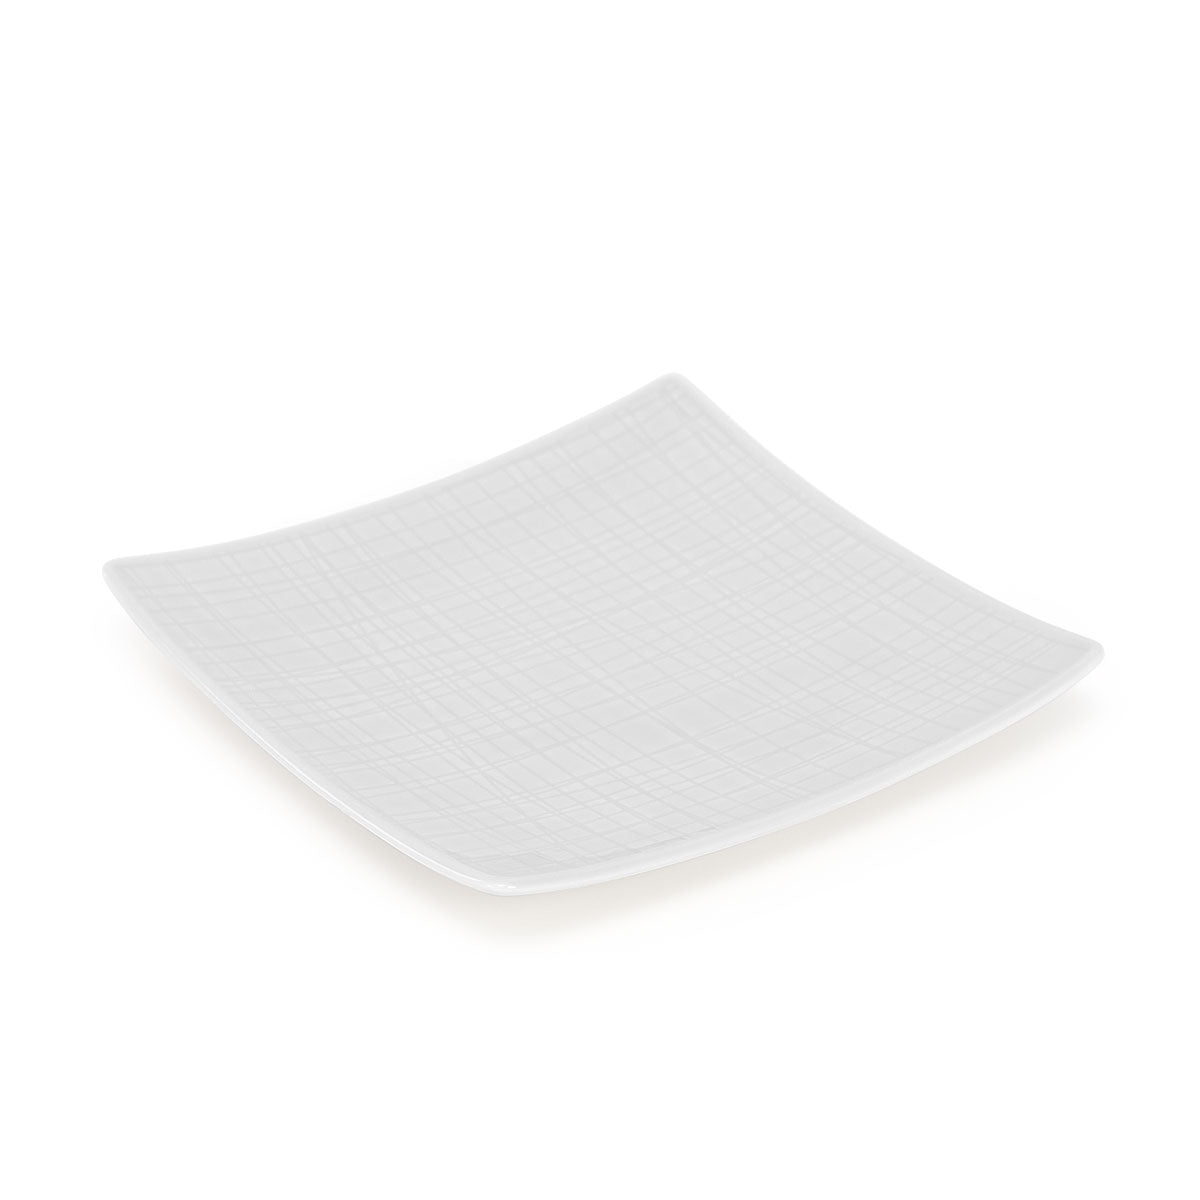 Rosenthal Weiss White Square Platter